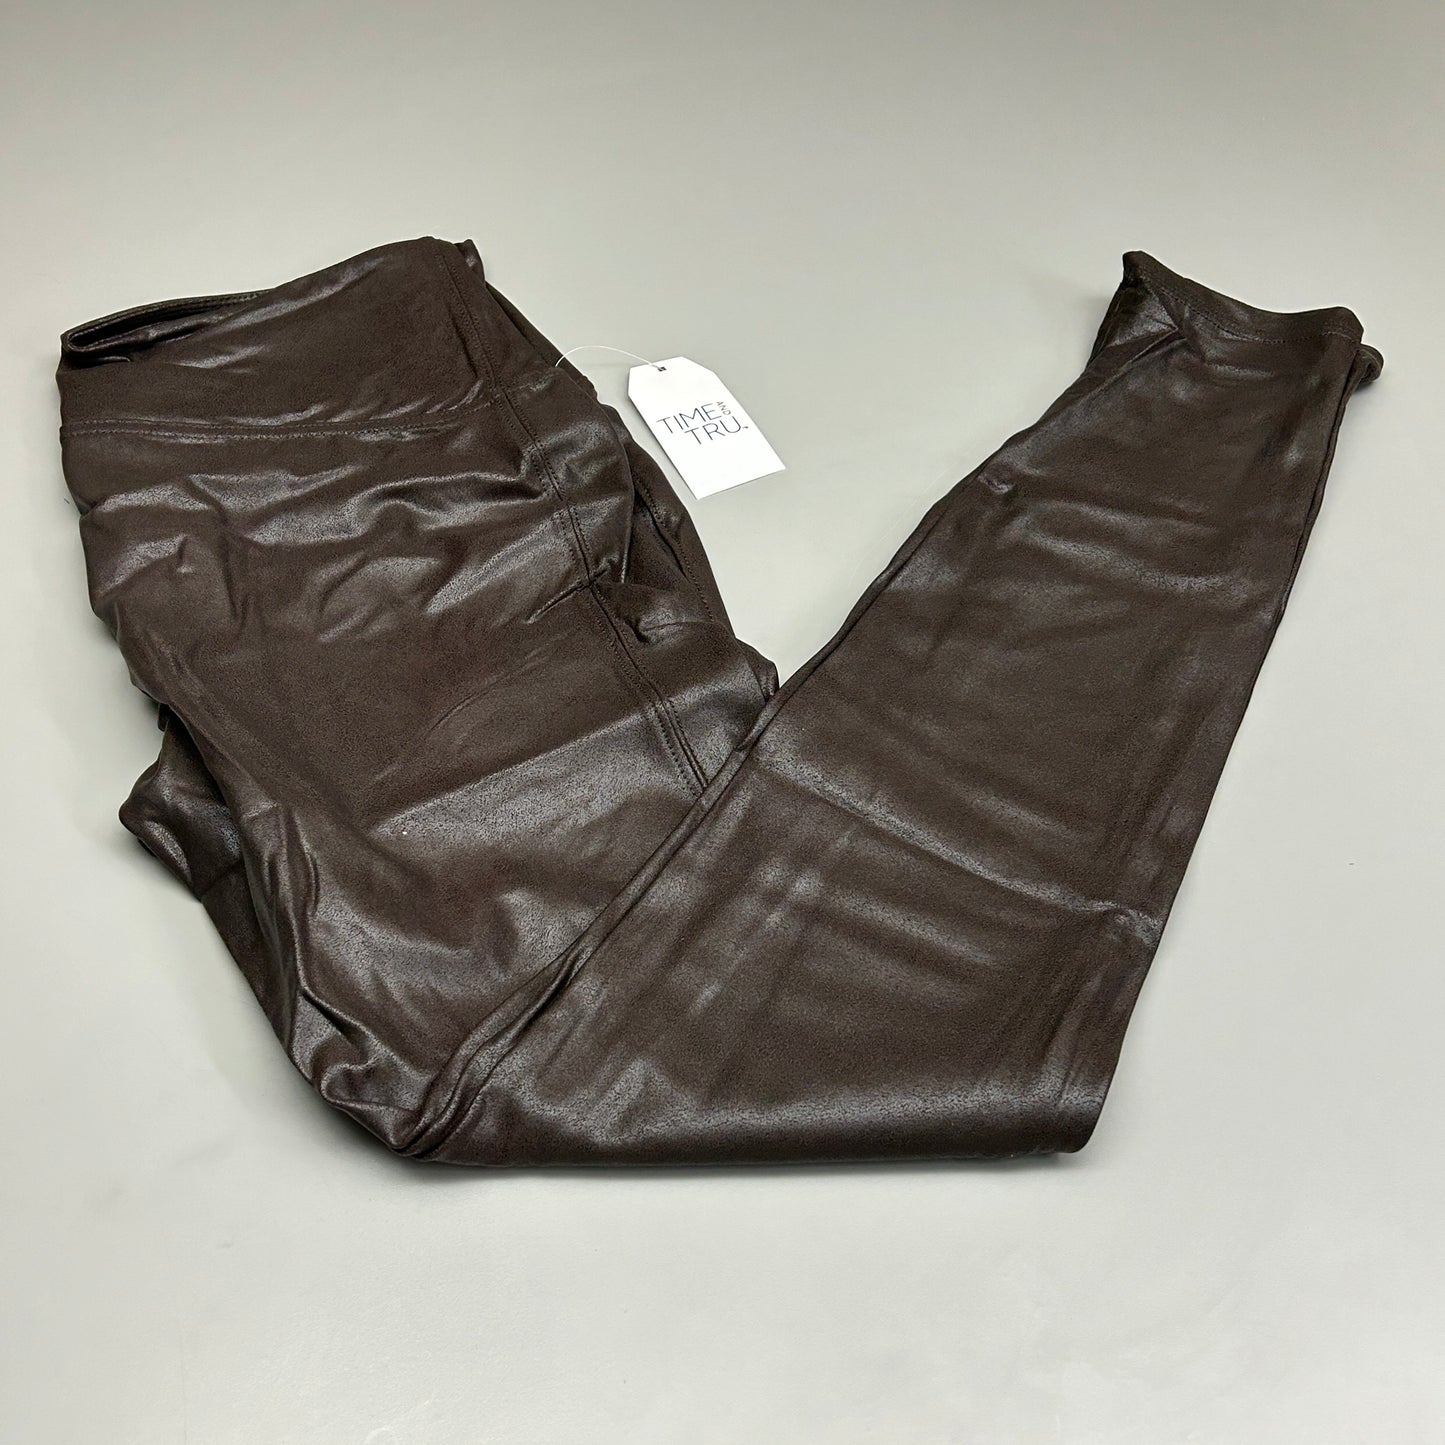 TIME AND TRU Women's Faux Leather Leggings Sz L 12-14 Brown (New